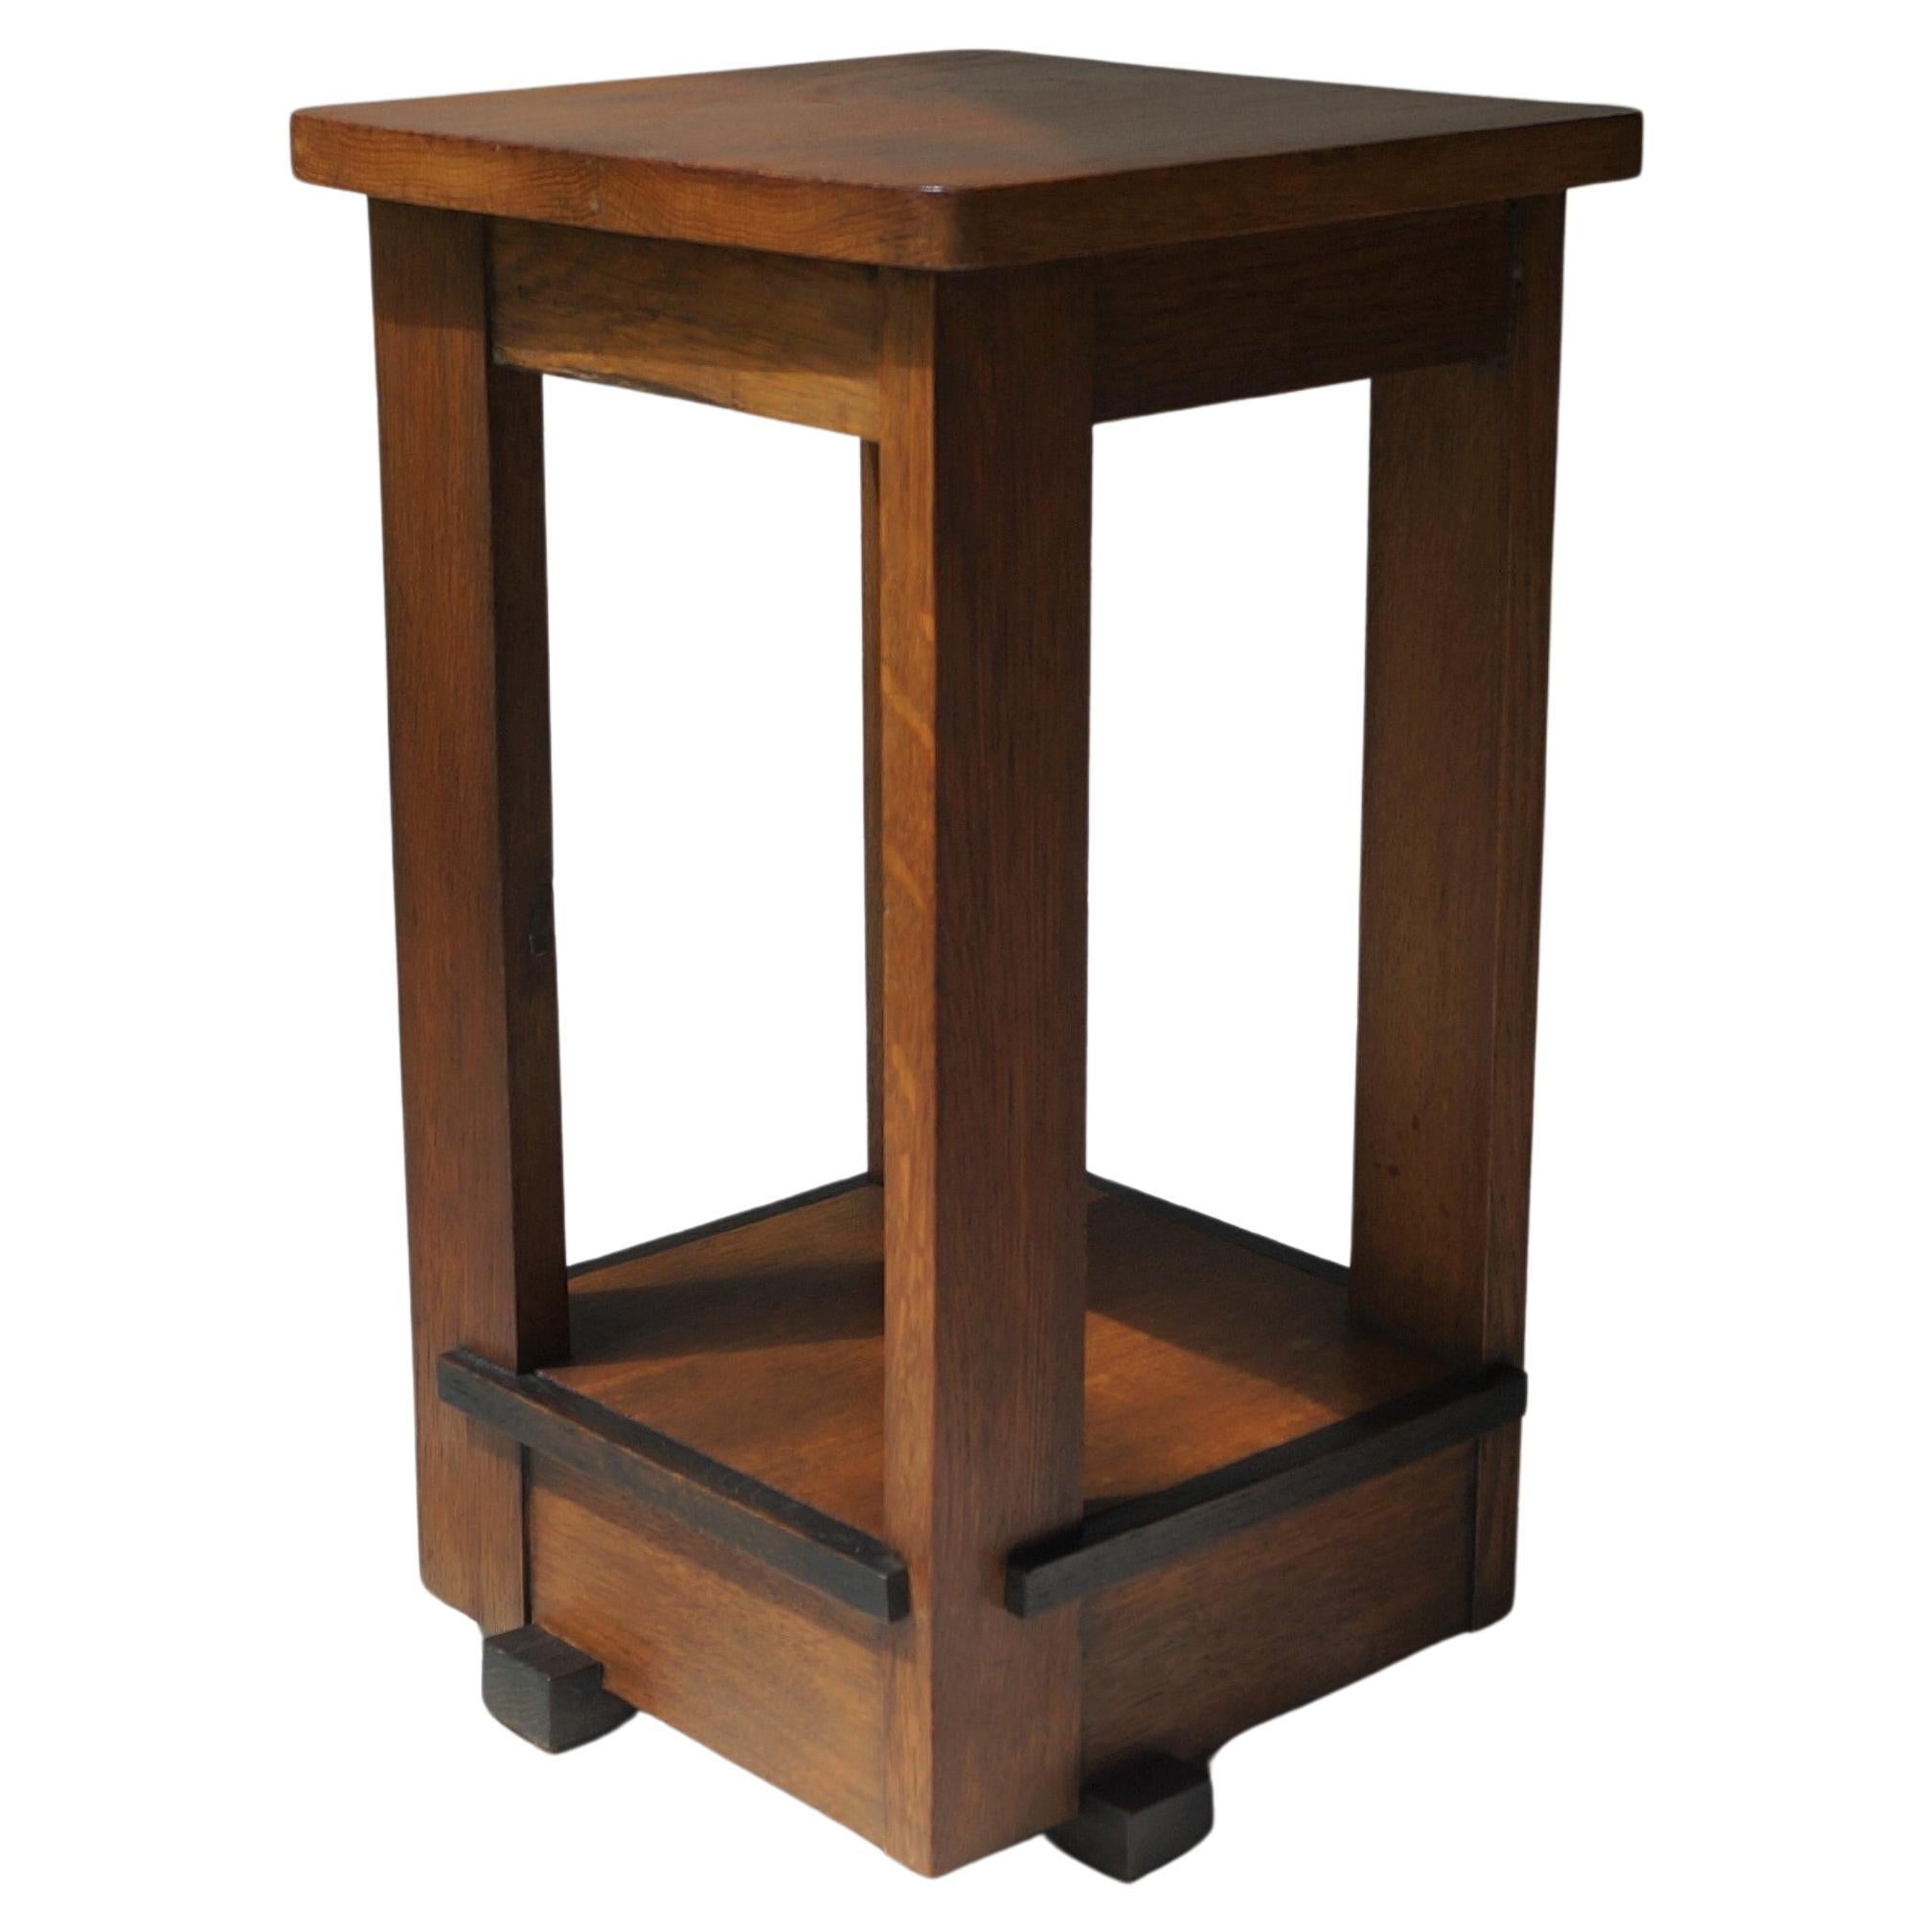 Dutch Art Deco Haagse School side table attributed to Jan Brunott, 1920s For Sale